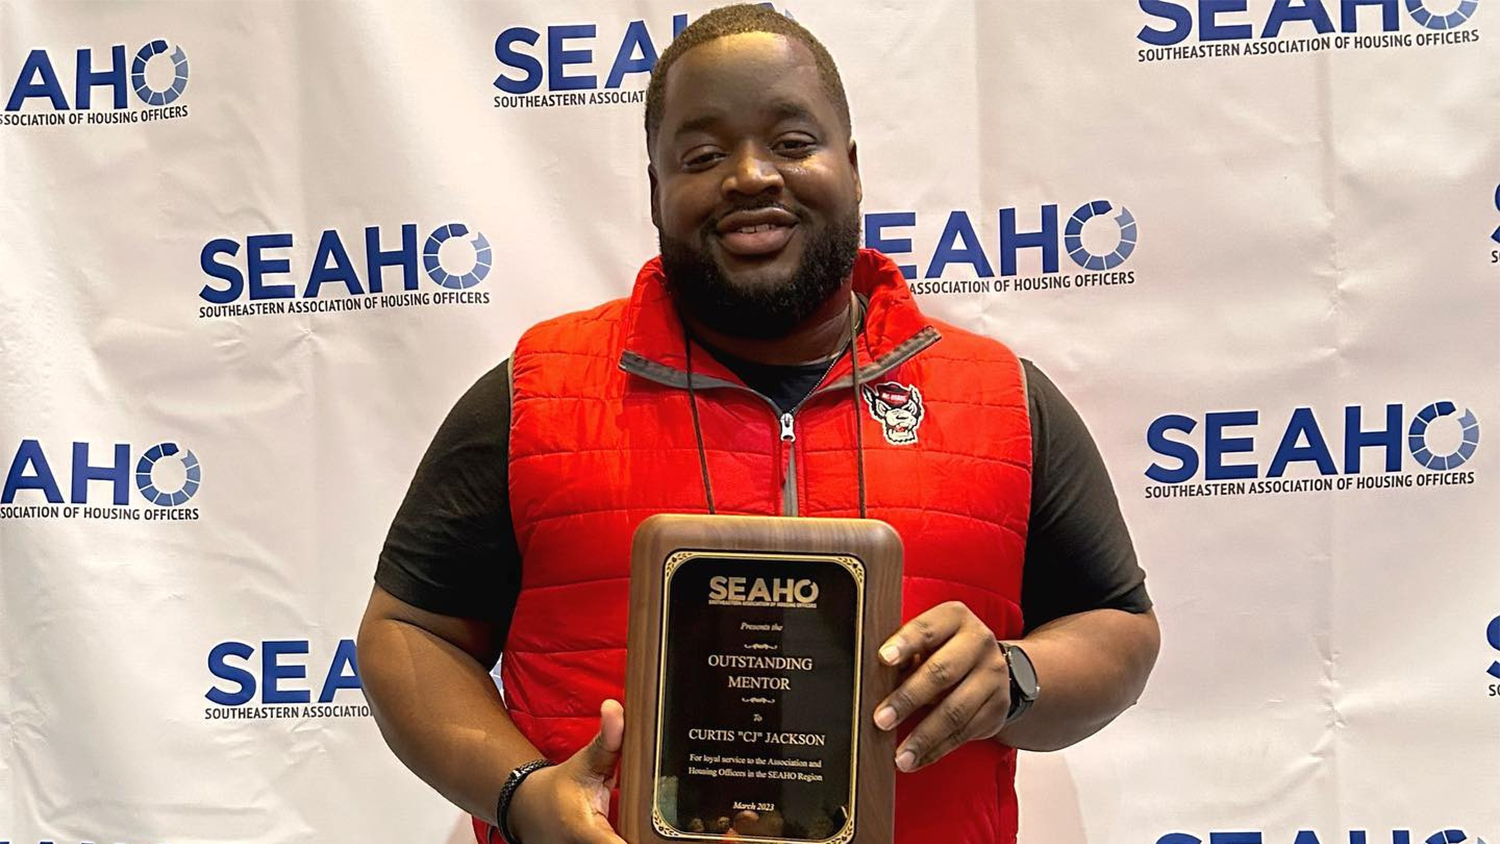 Curtis "CJ" Jackson holding a plaque in front of a white backdrop with the SEAHO logo on it